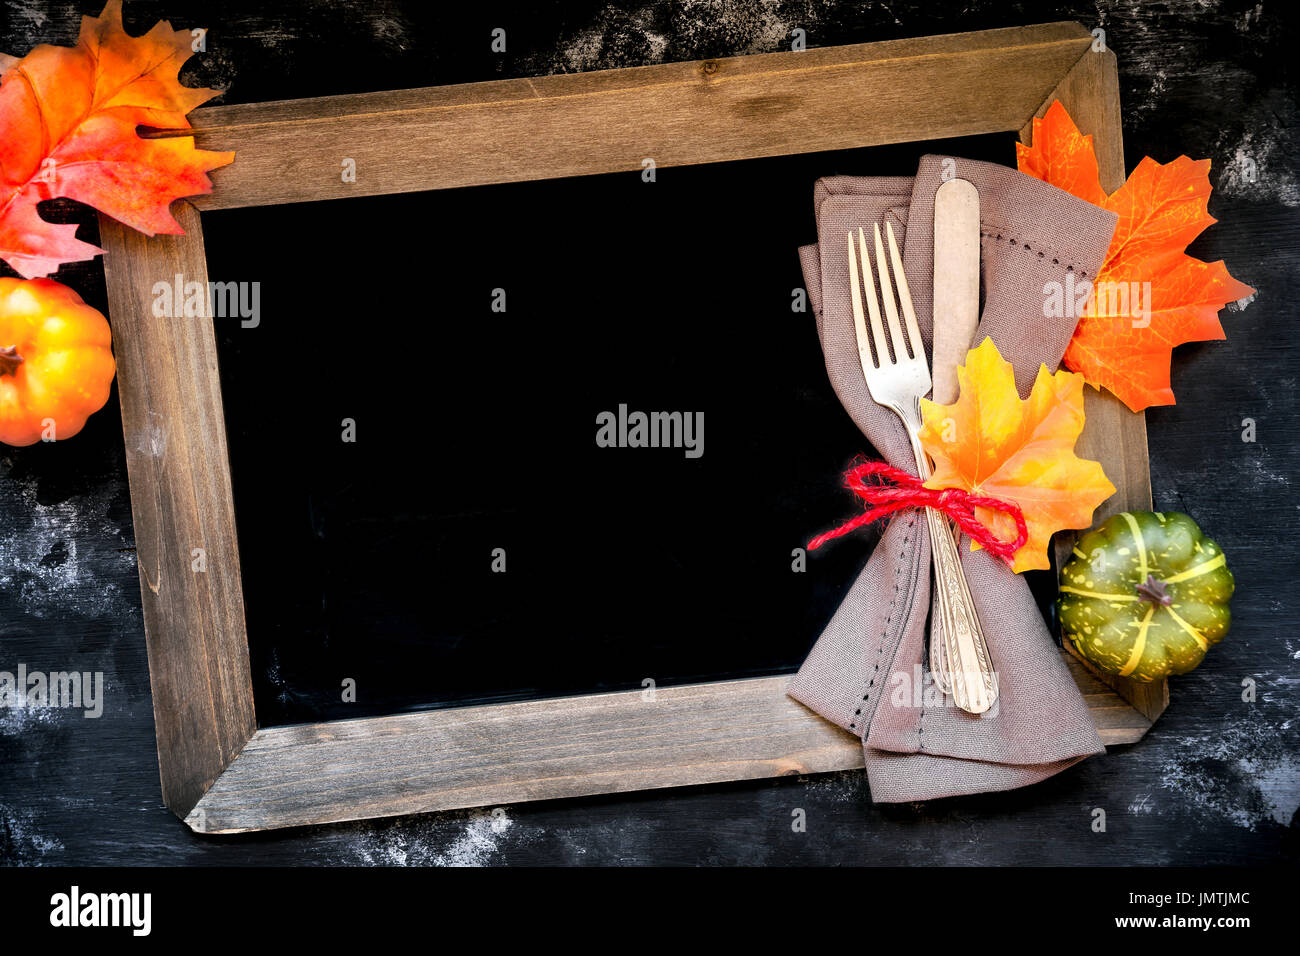 Autumn menu concept - rustic table place setting with a fork and a knife wrapped in a napkin with fall season decorative leaves and pumpkins with chal Stock Photo